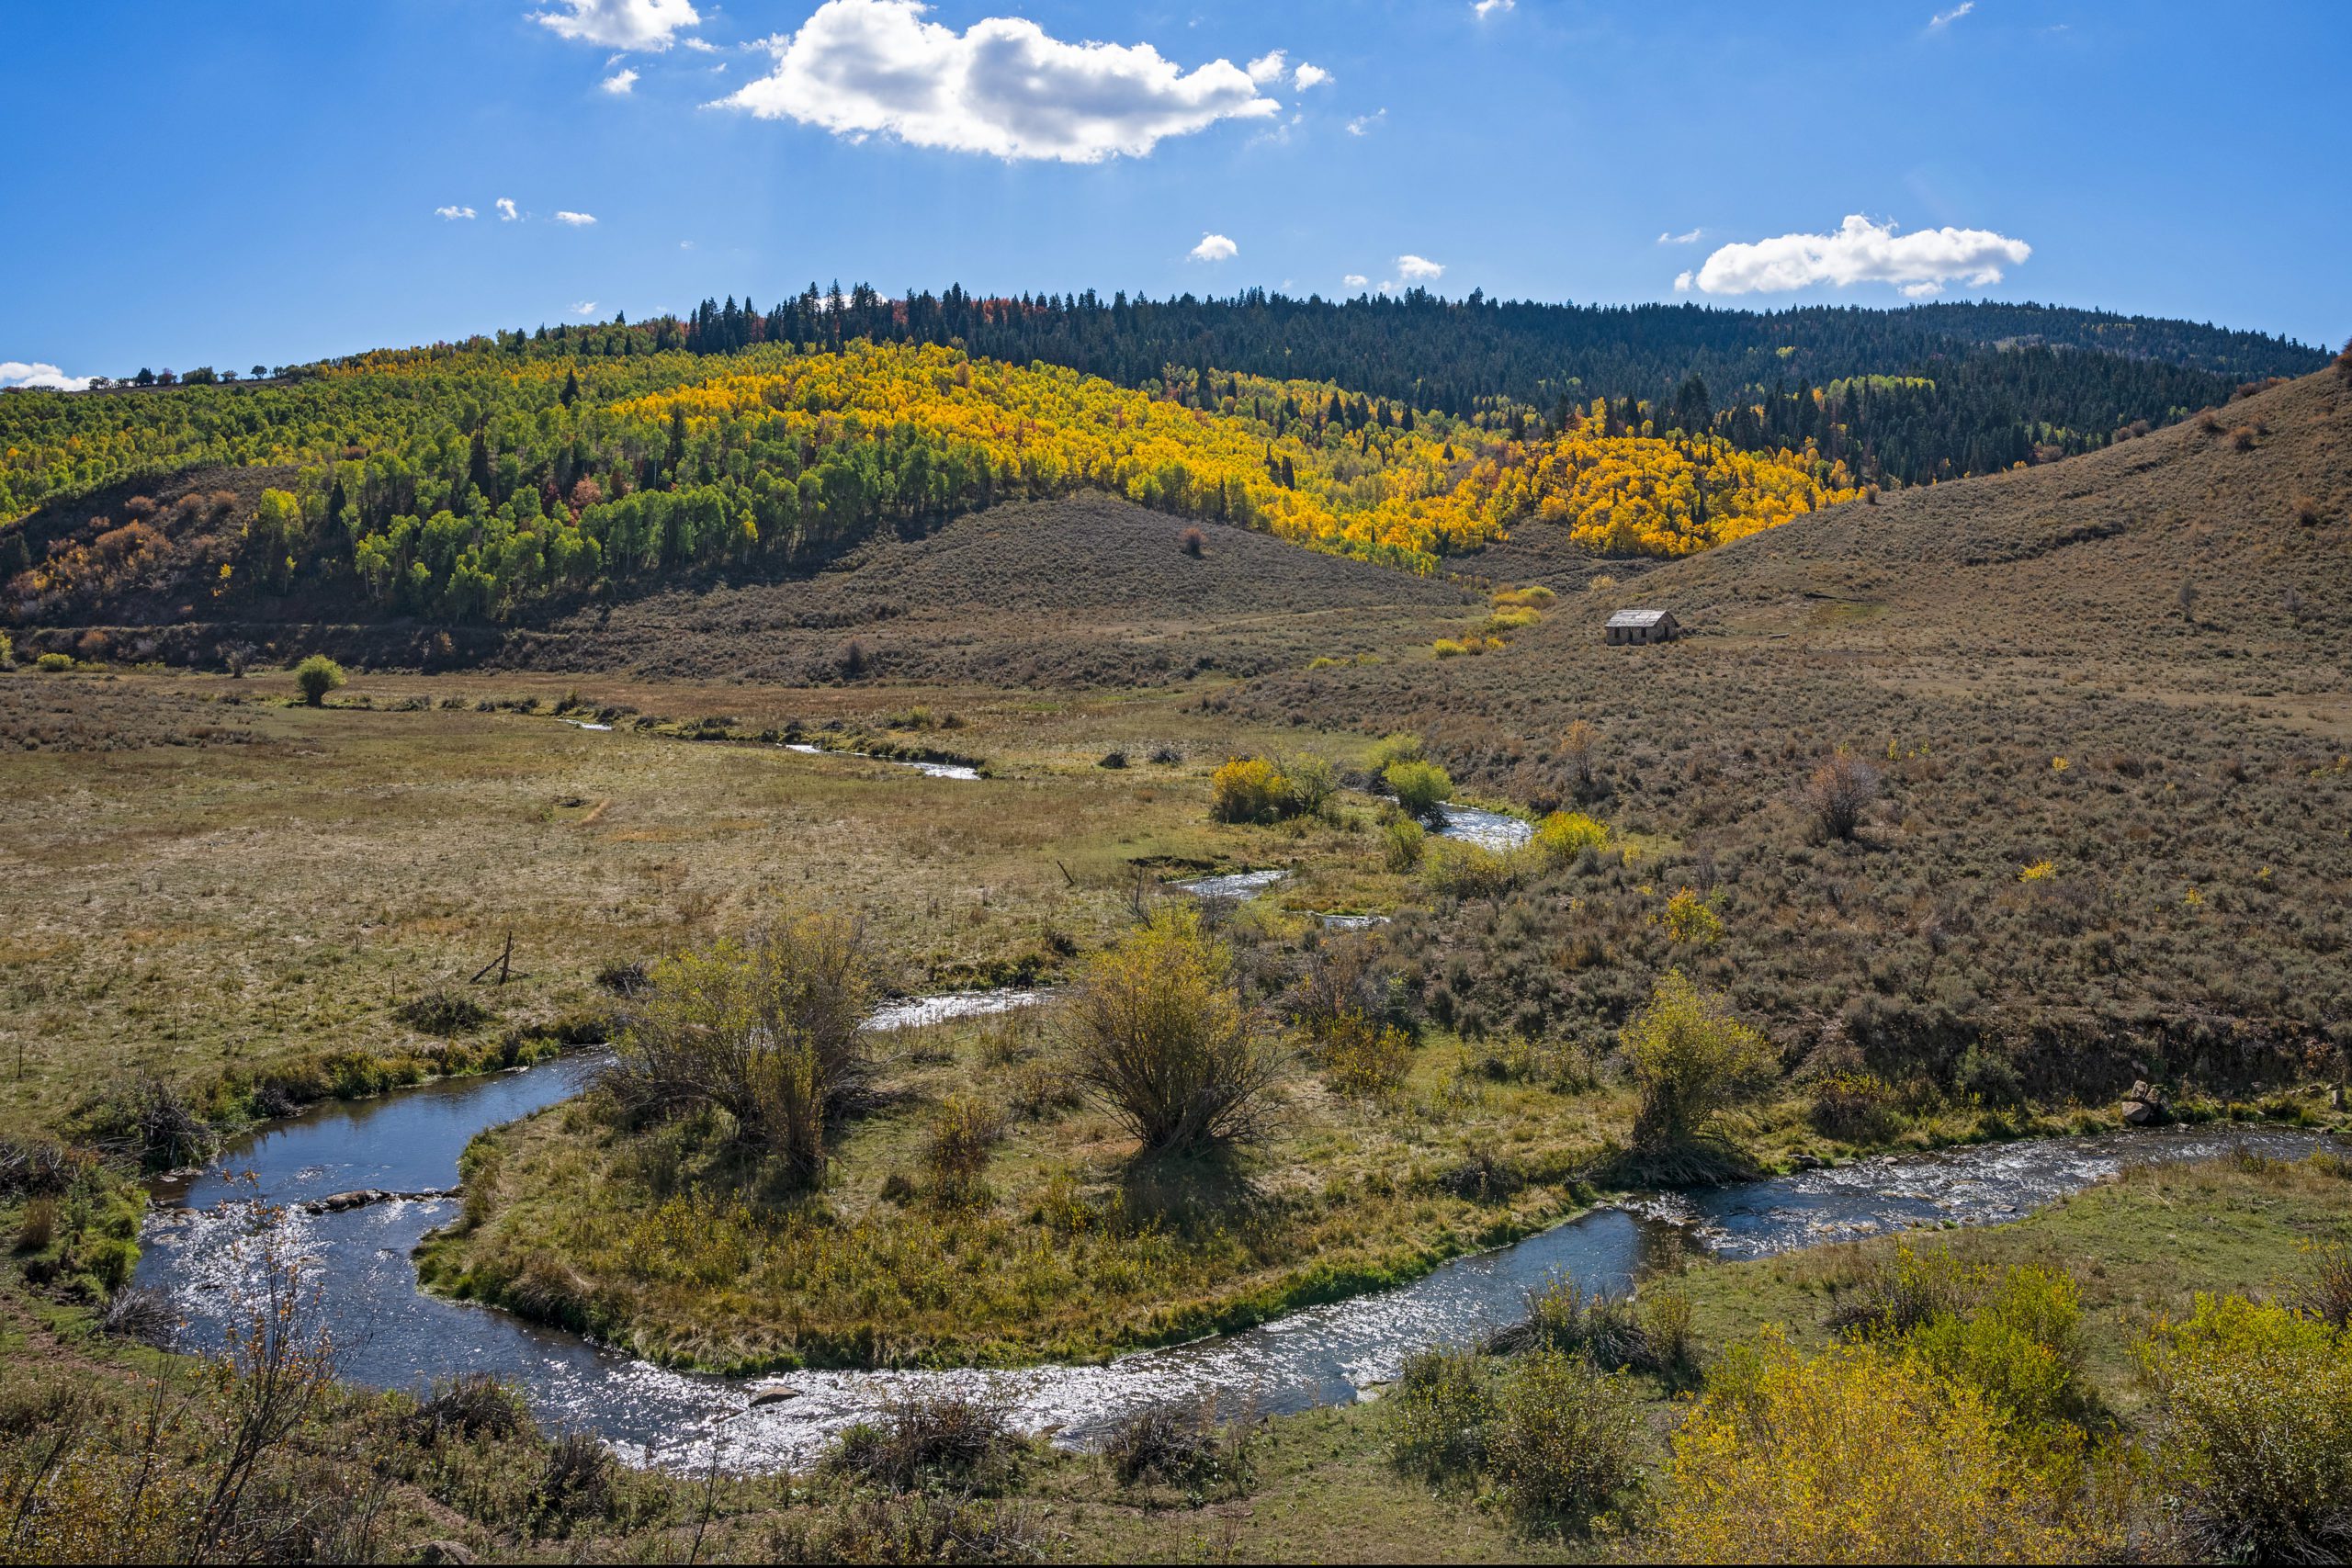 The winding East Canyon Creek with Fall colors